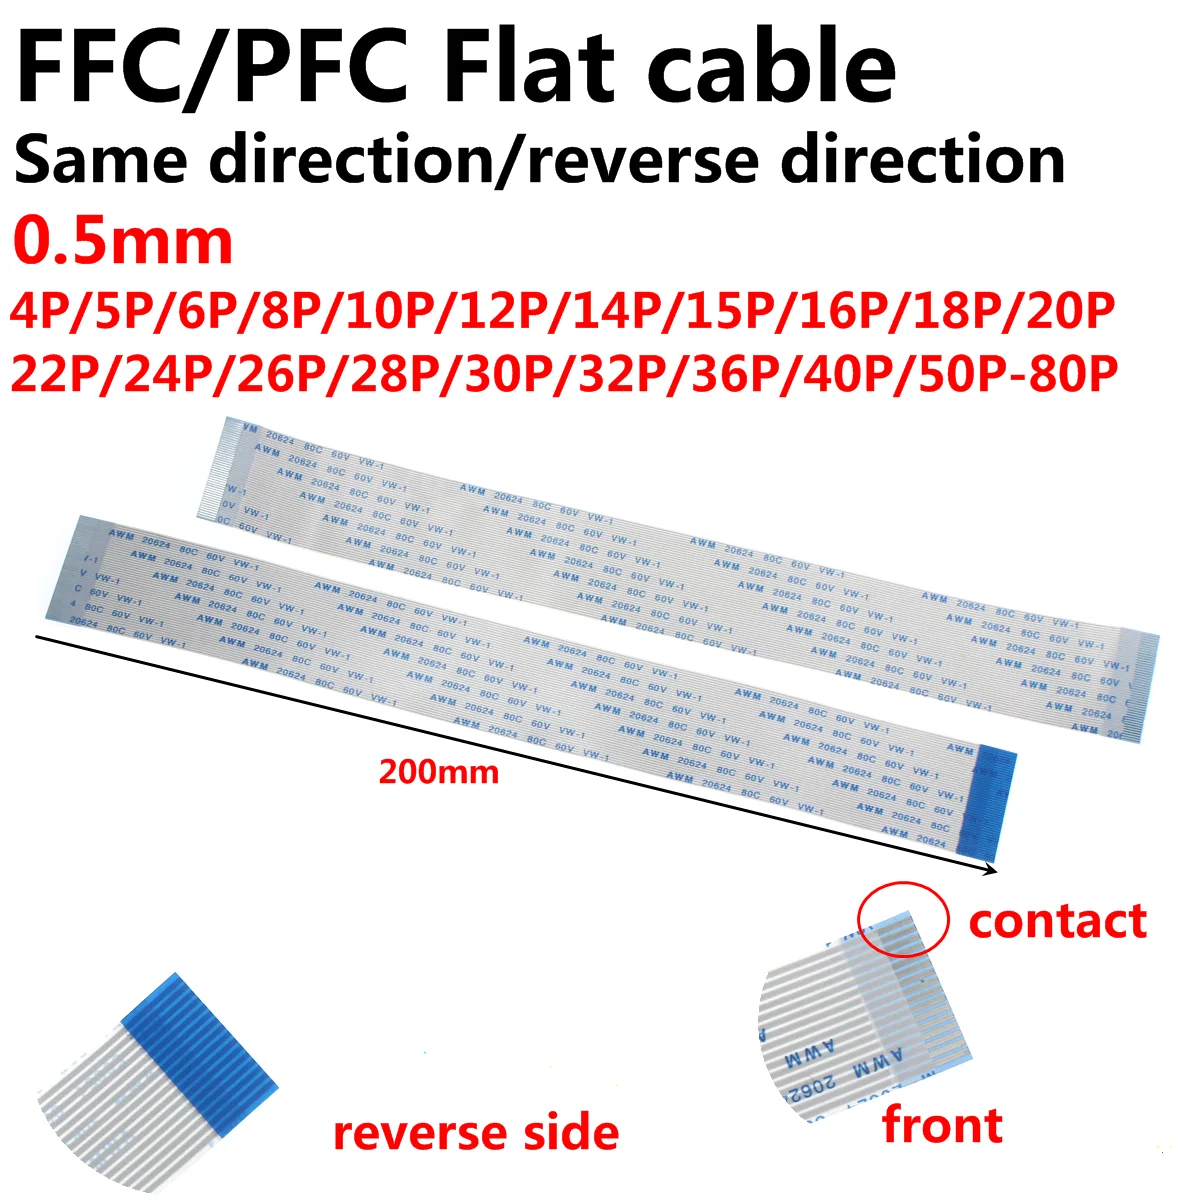 20Pcs FPC Flexible Flat Cable FFC 0.5MM 200MM 20cm A B type interface 4P 5P 6P 8P 10P 12P 14P 16P 18P 20P 22P 24P-40P 15cm 40pin 0 5pitch 80mm 123mm a type flexible flat cable ffc awm 20624 rohs for ttl lcd dvd computer